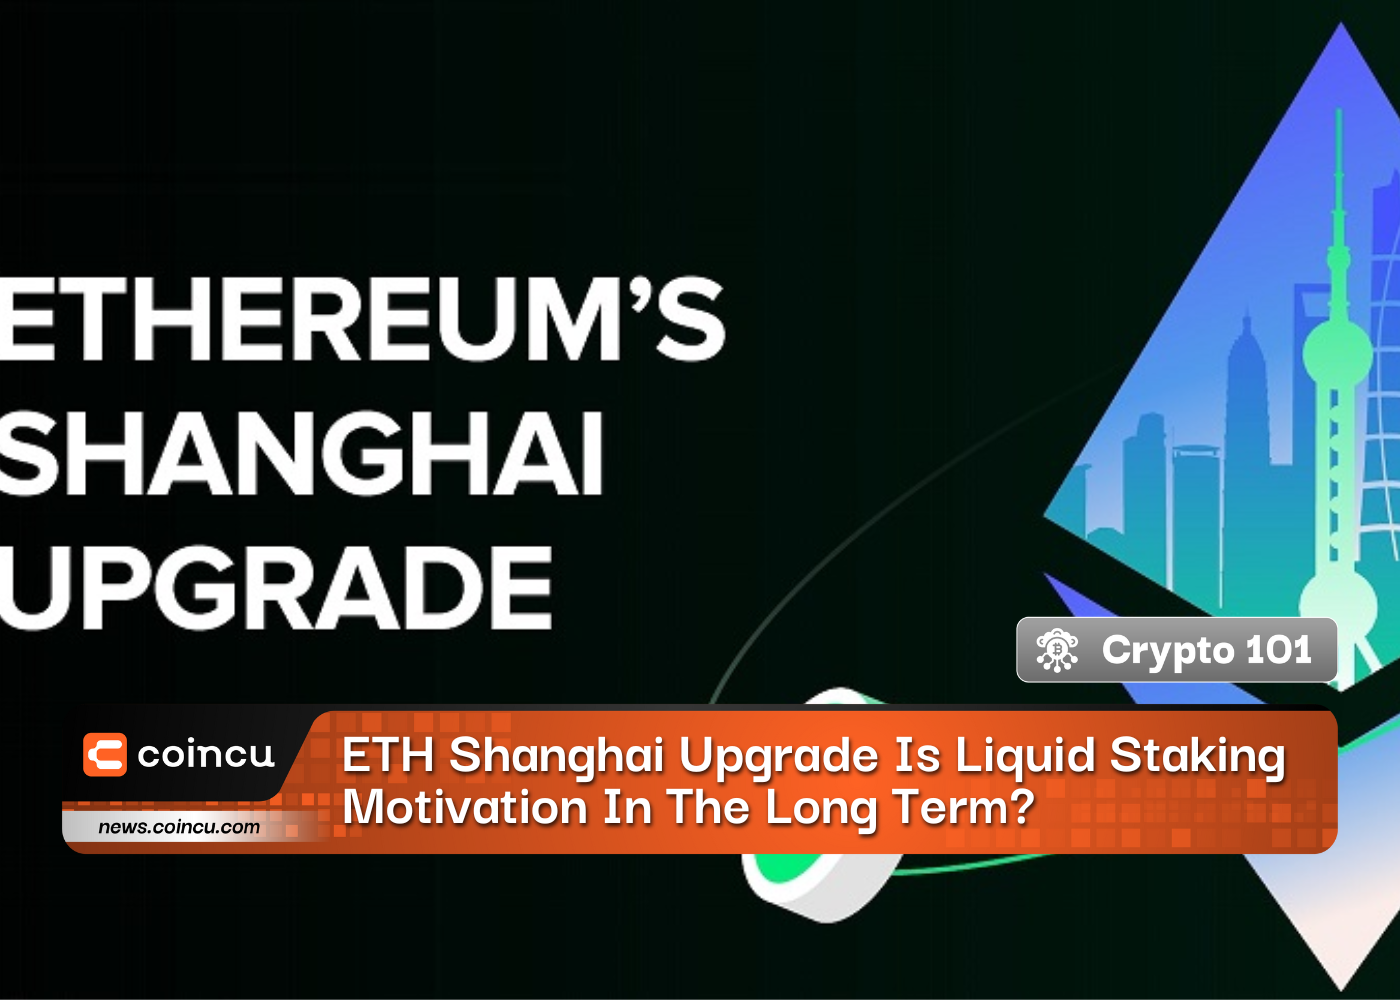 ETH Shanghai Upgrade Is Liquid Staking Motivation In The Long Term?